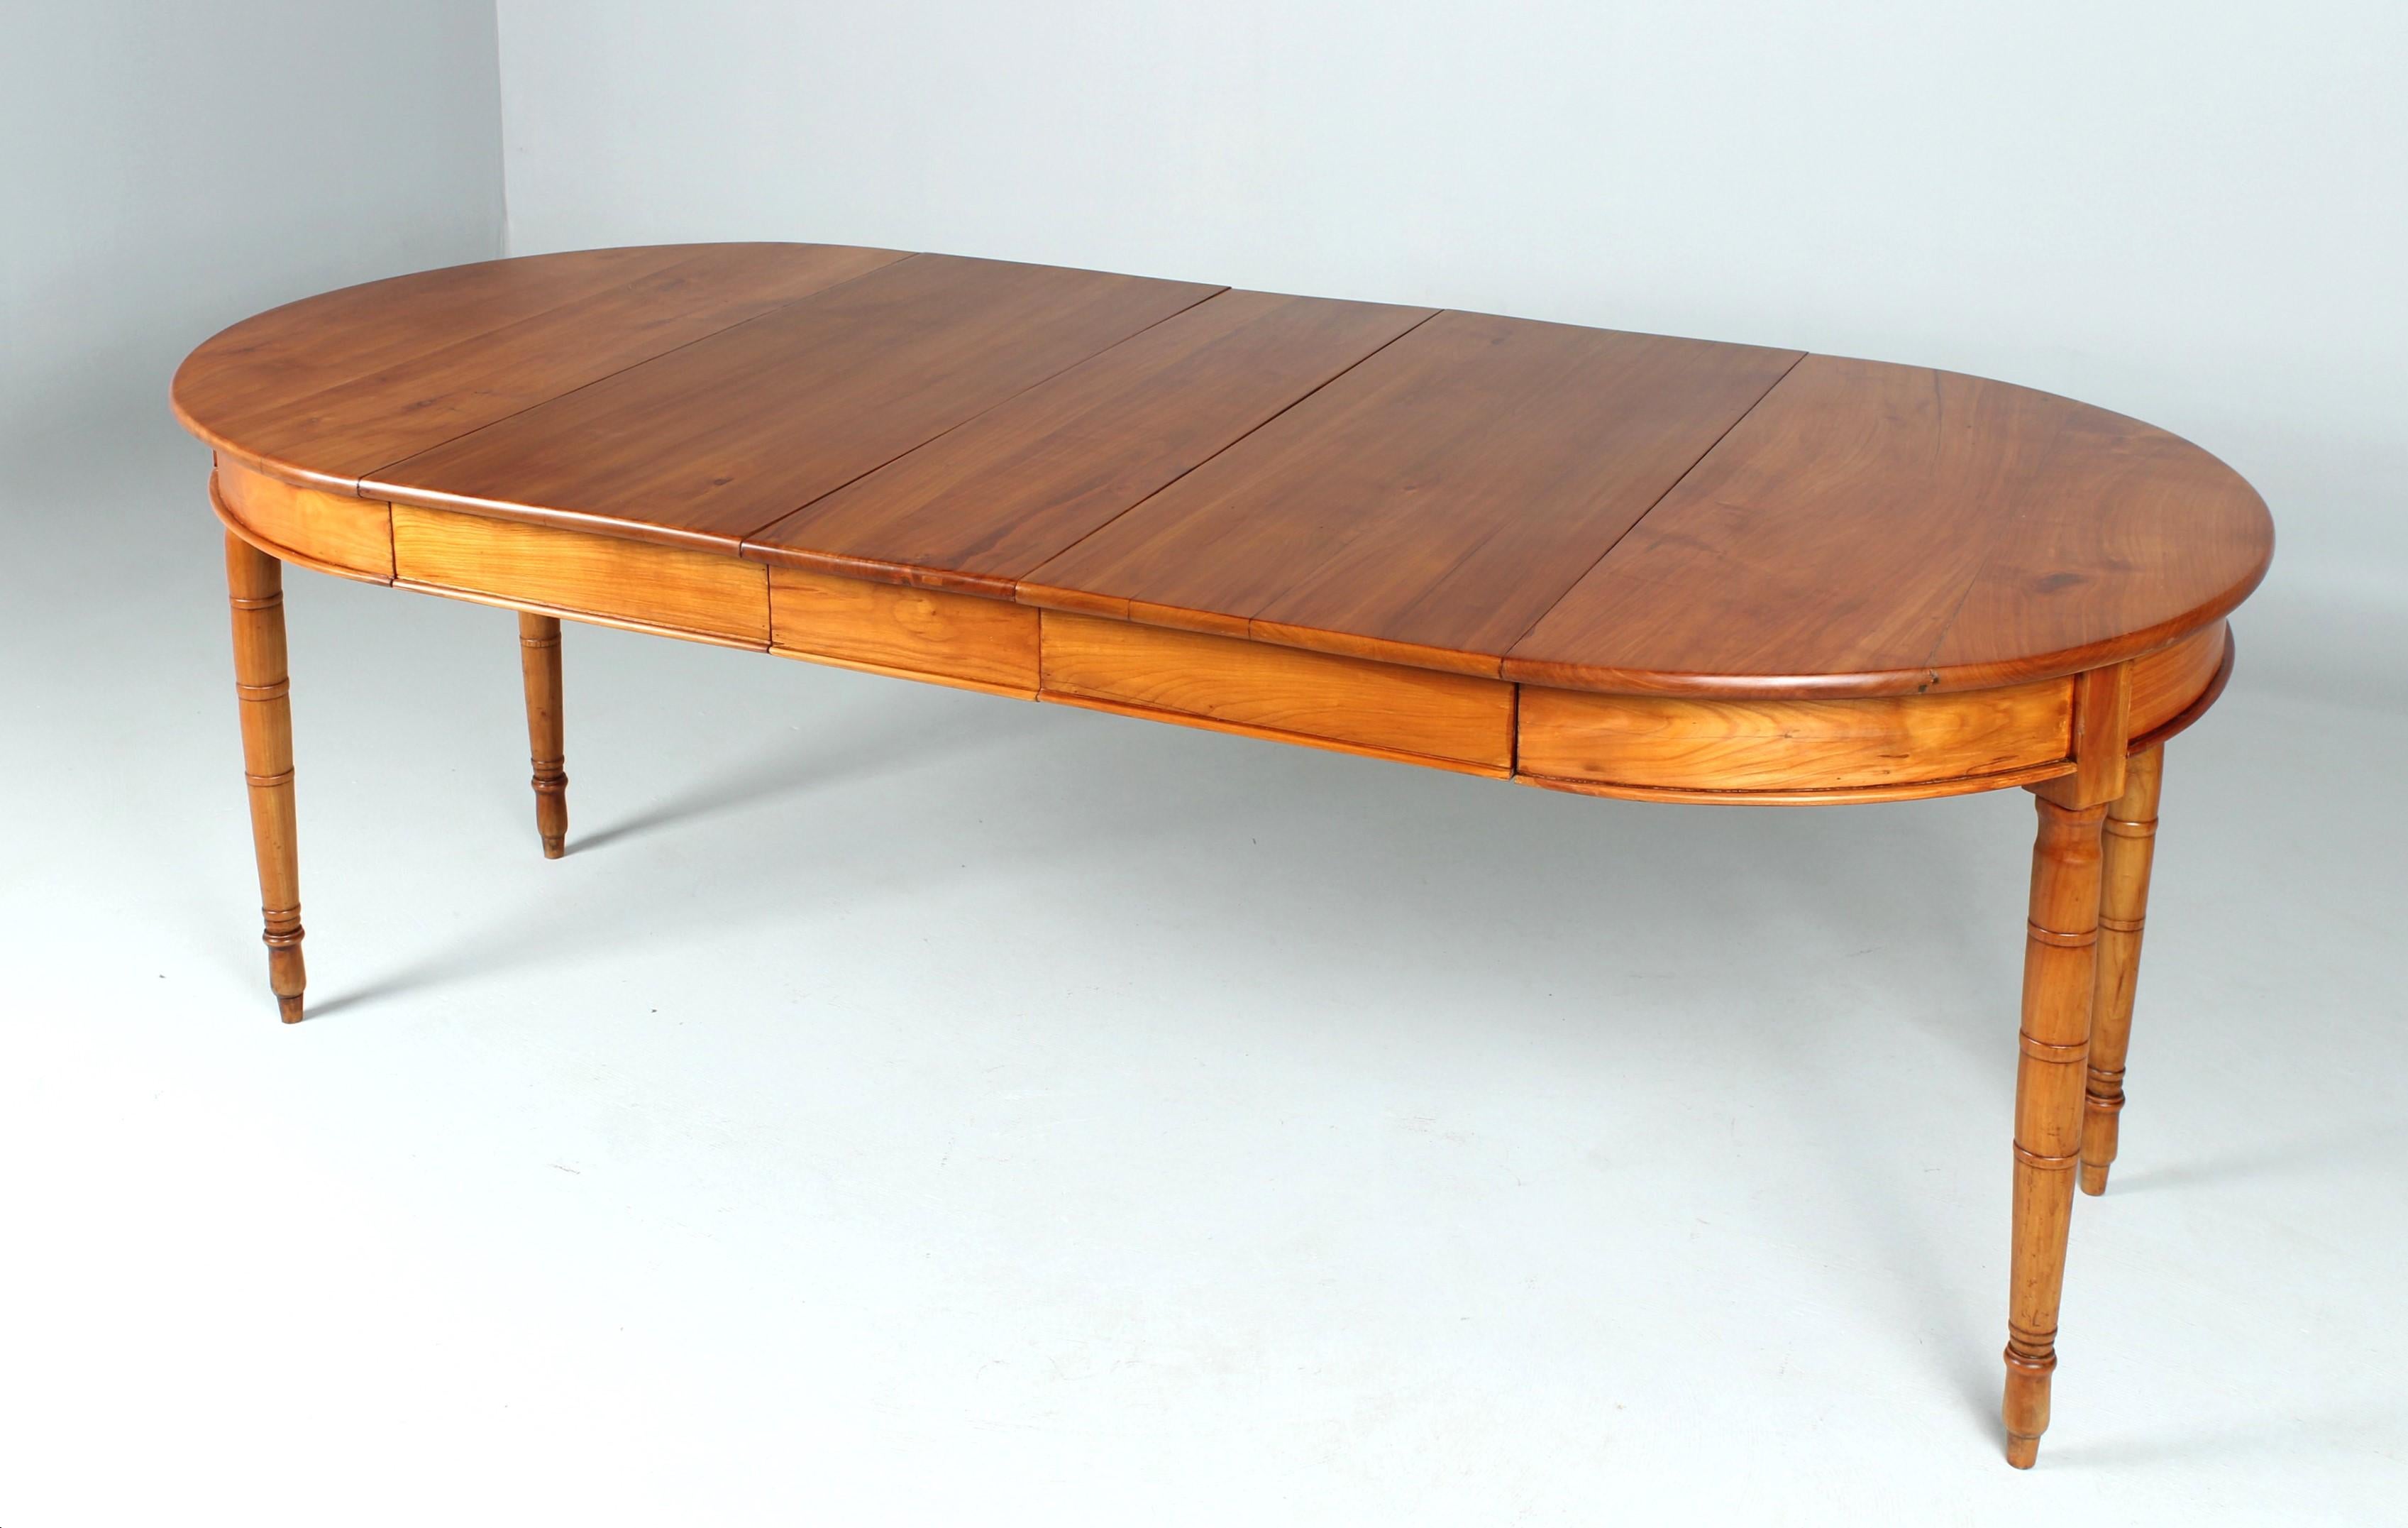 Extendable Cherrywood Dining Table, Germany, Mid 19th Century For Sale 1